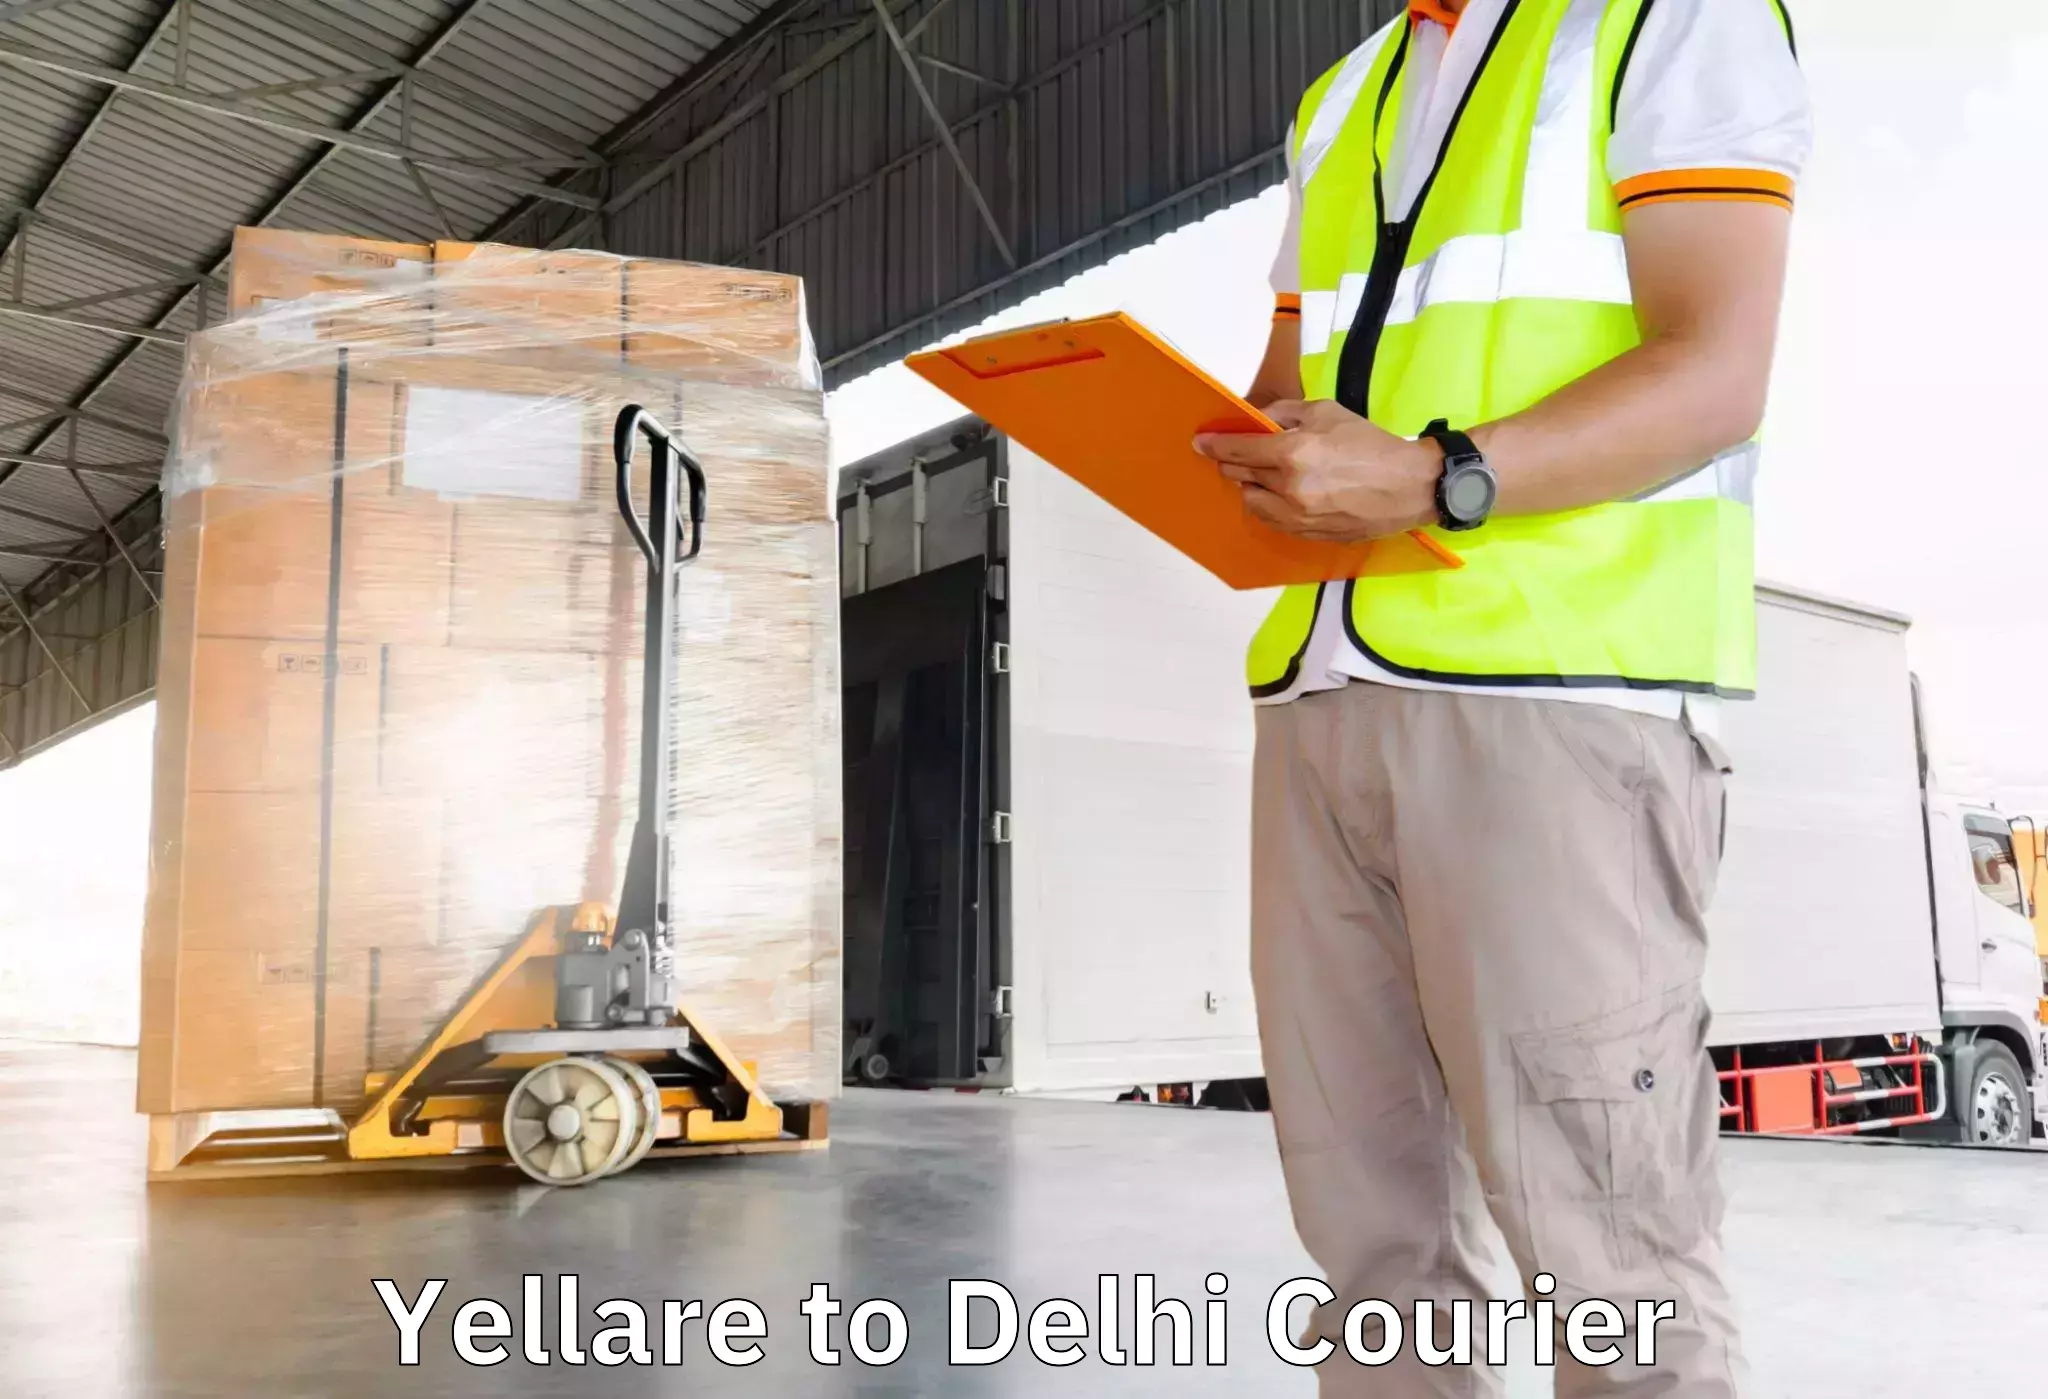 Furniture moving experts Yellare to East Delhi